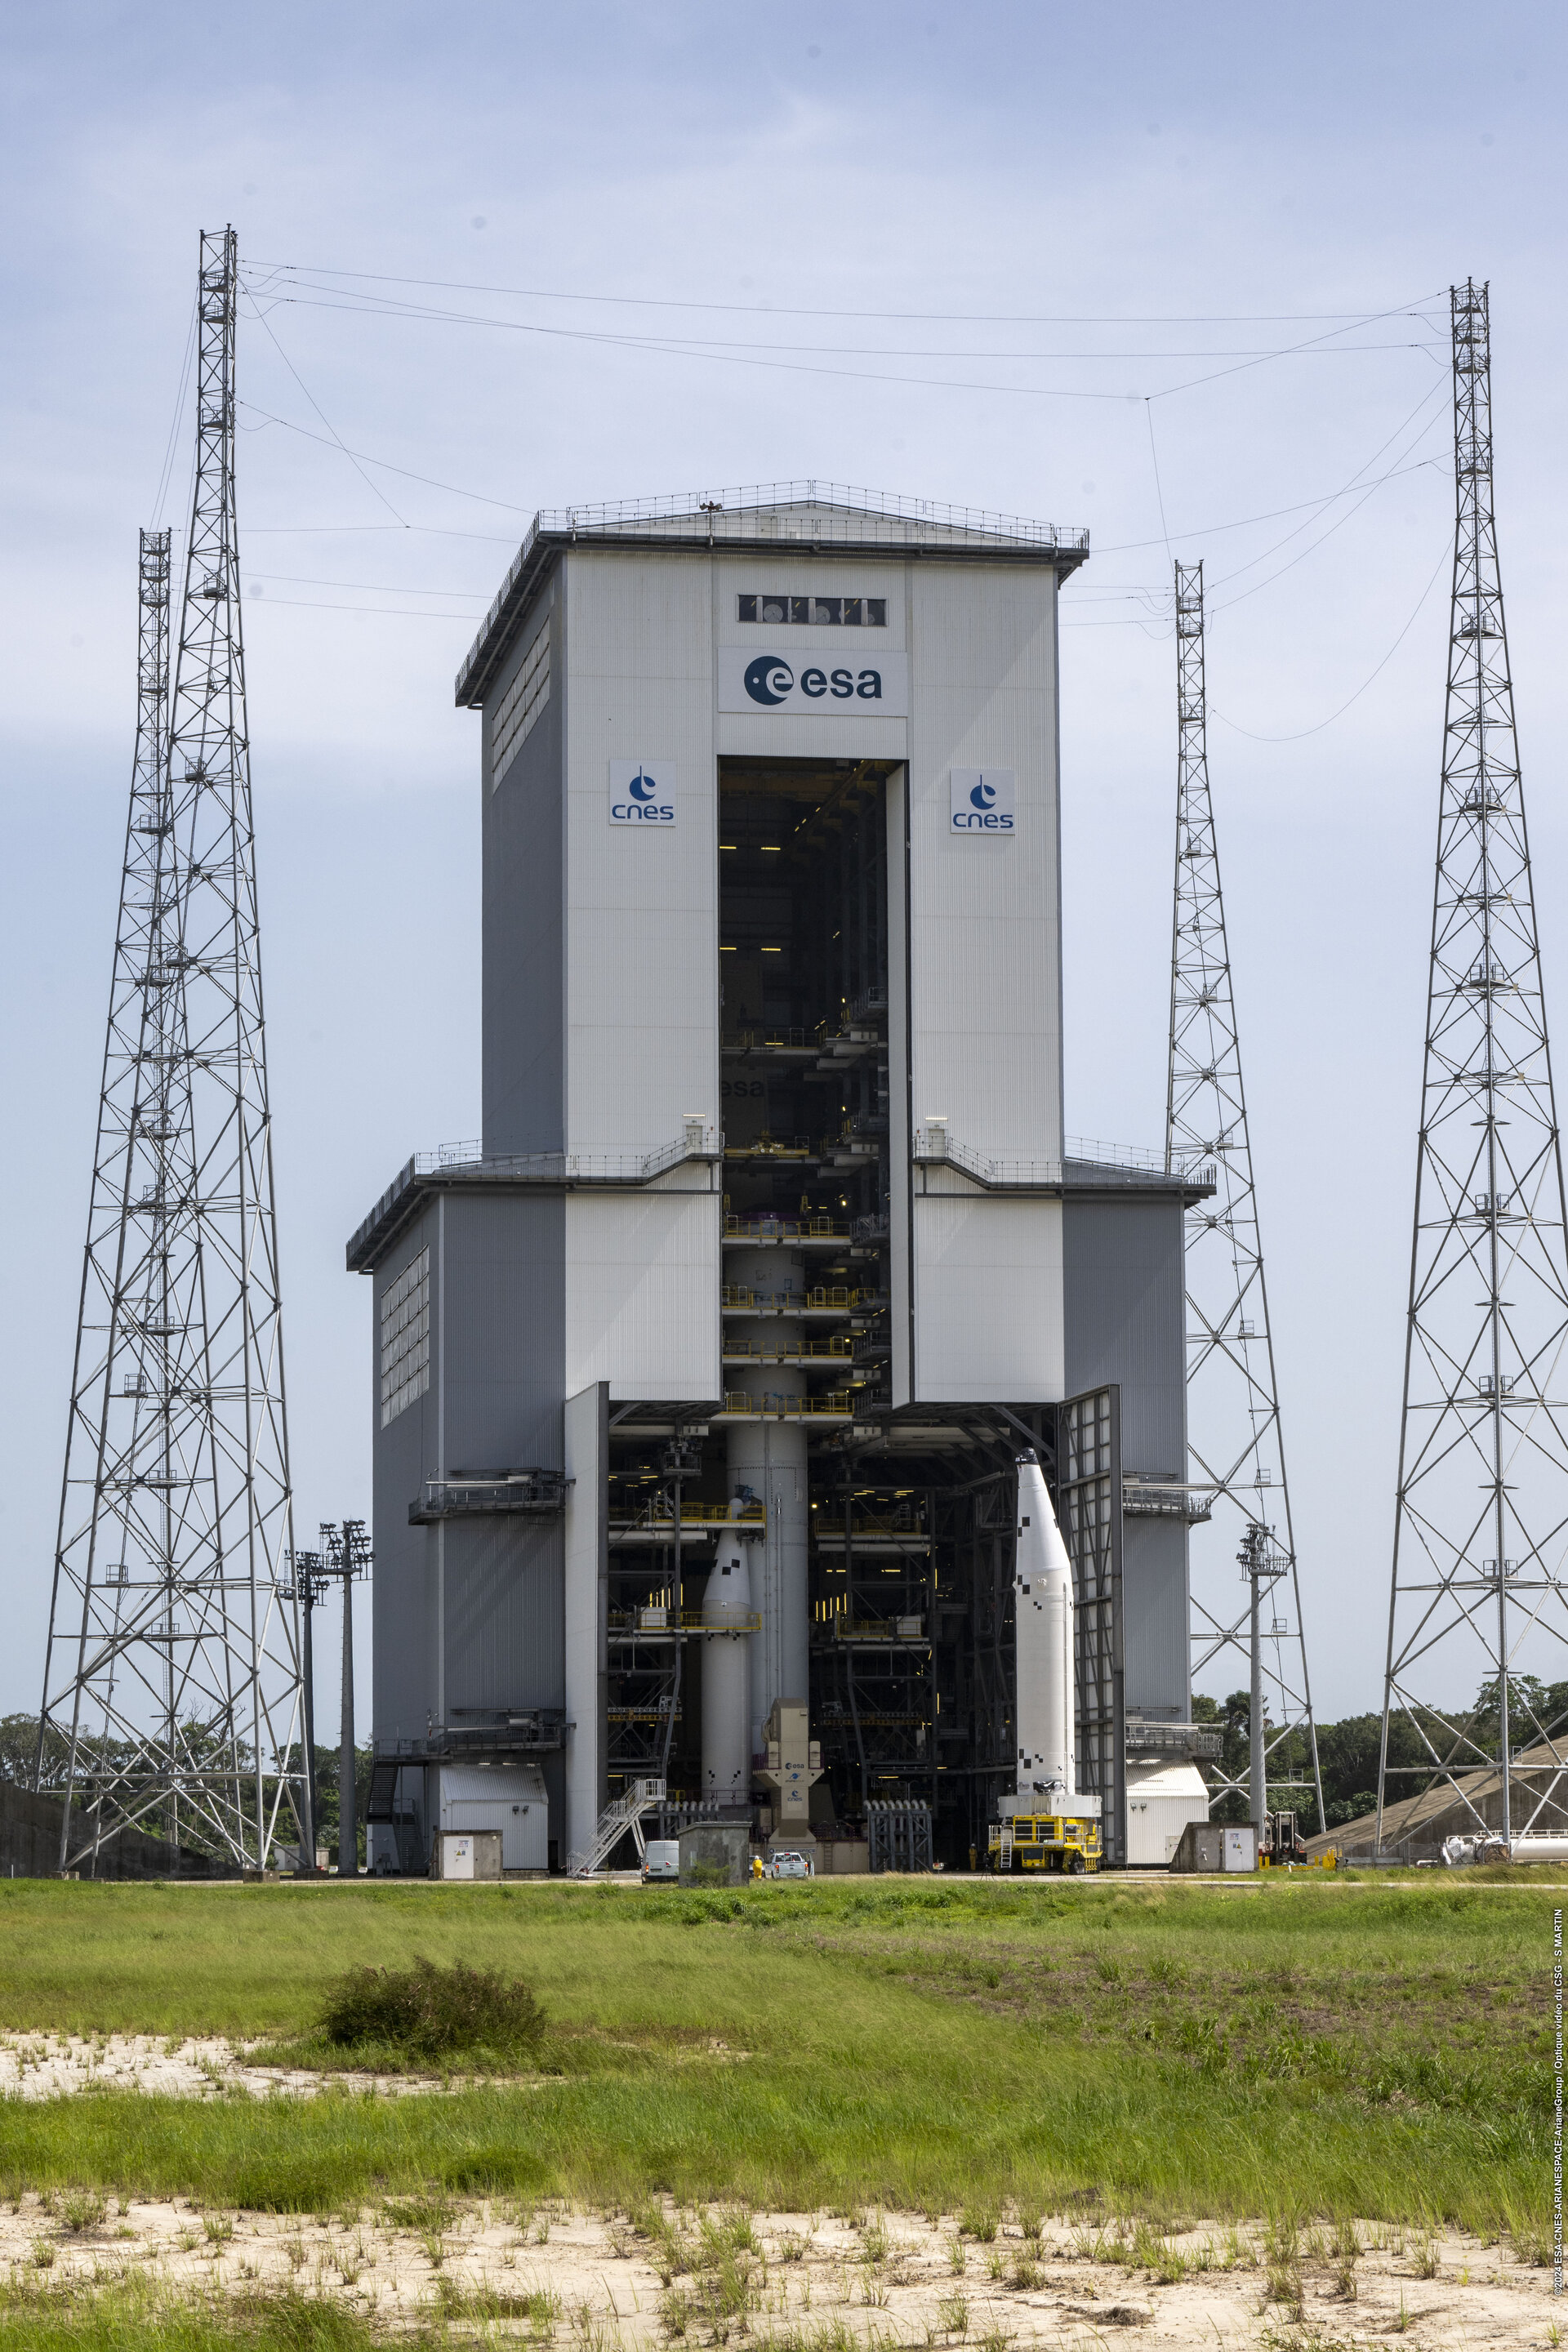 Second booster completes Ariane 6 propulsion stages on the launch pad